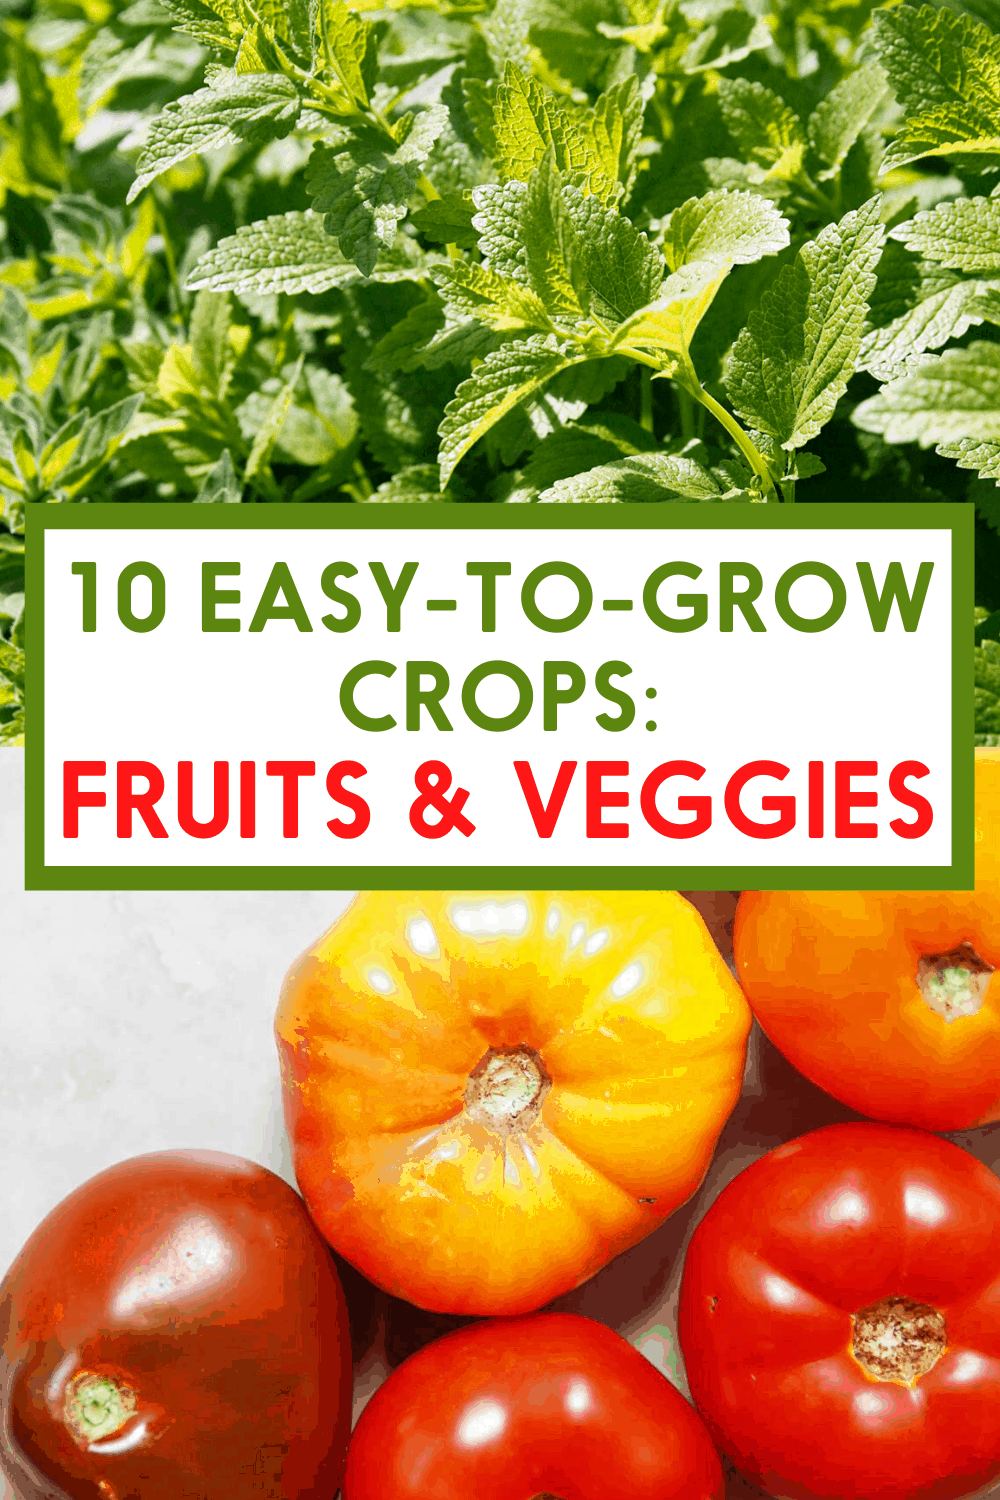 Tomatoes are easy to grow crops.